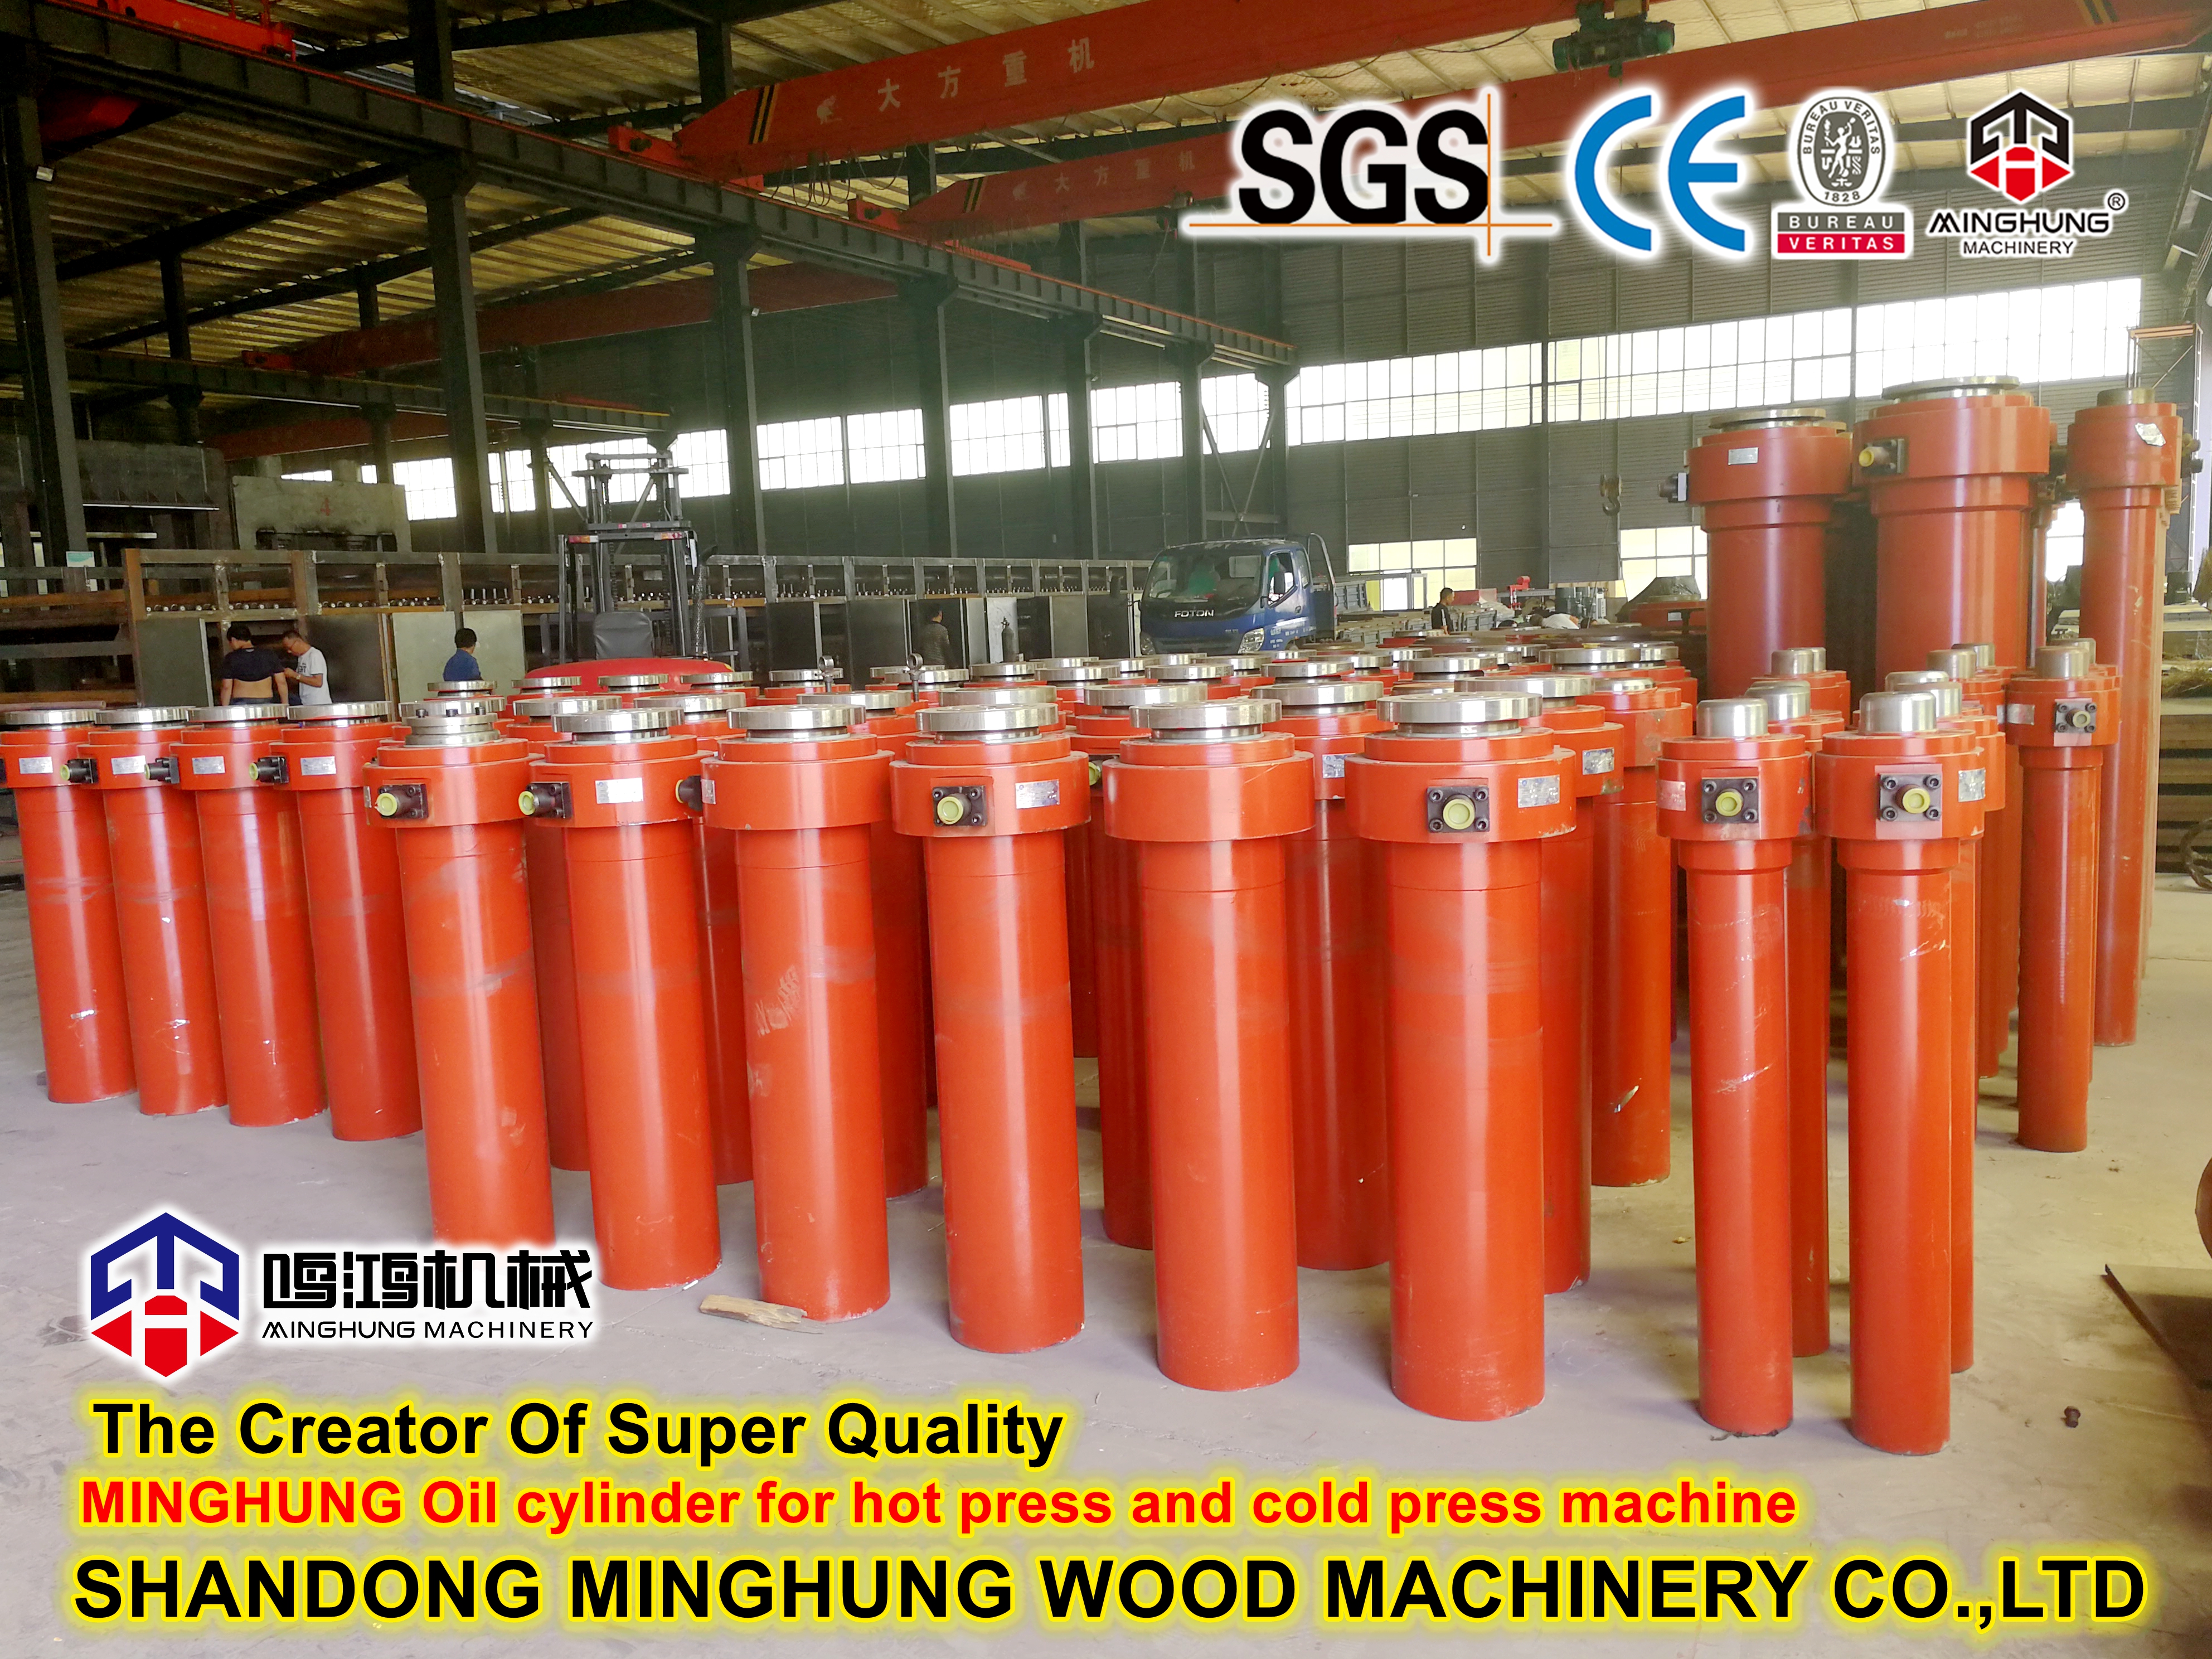 MINGHUNG Oil cylinder for hot press machine